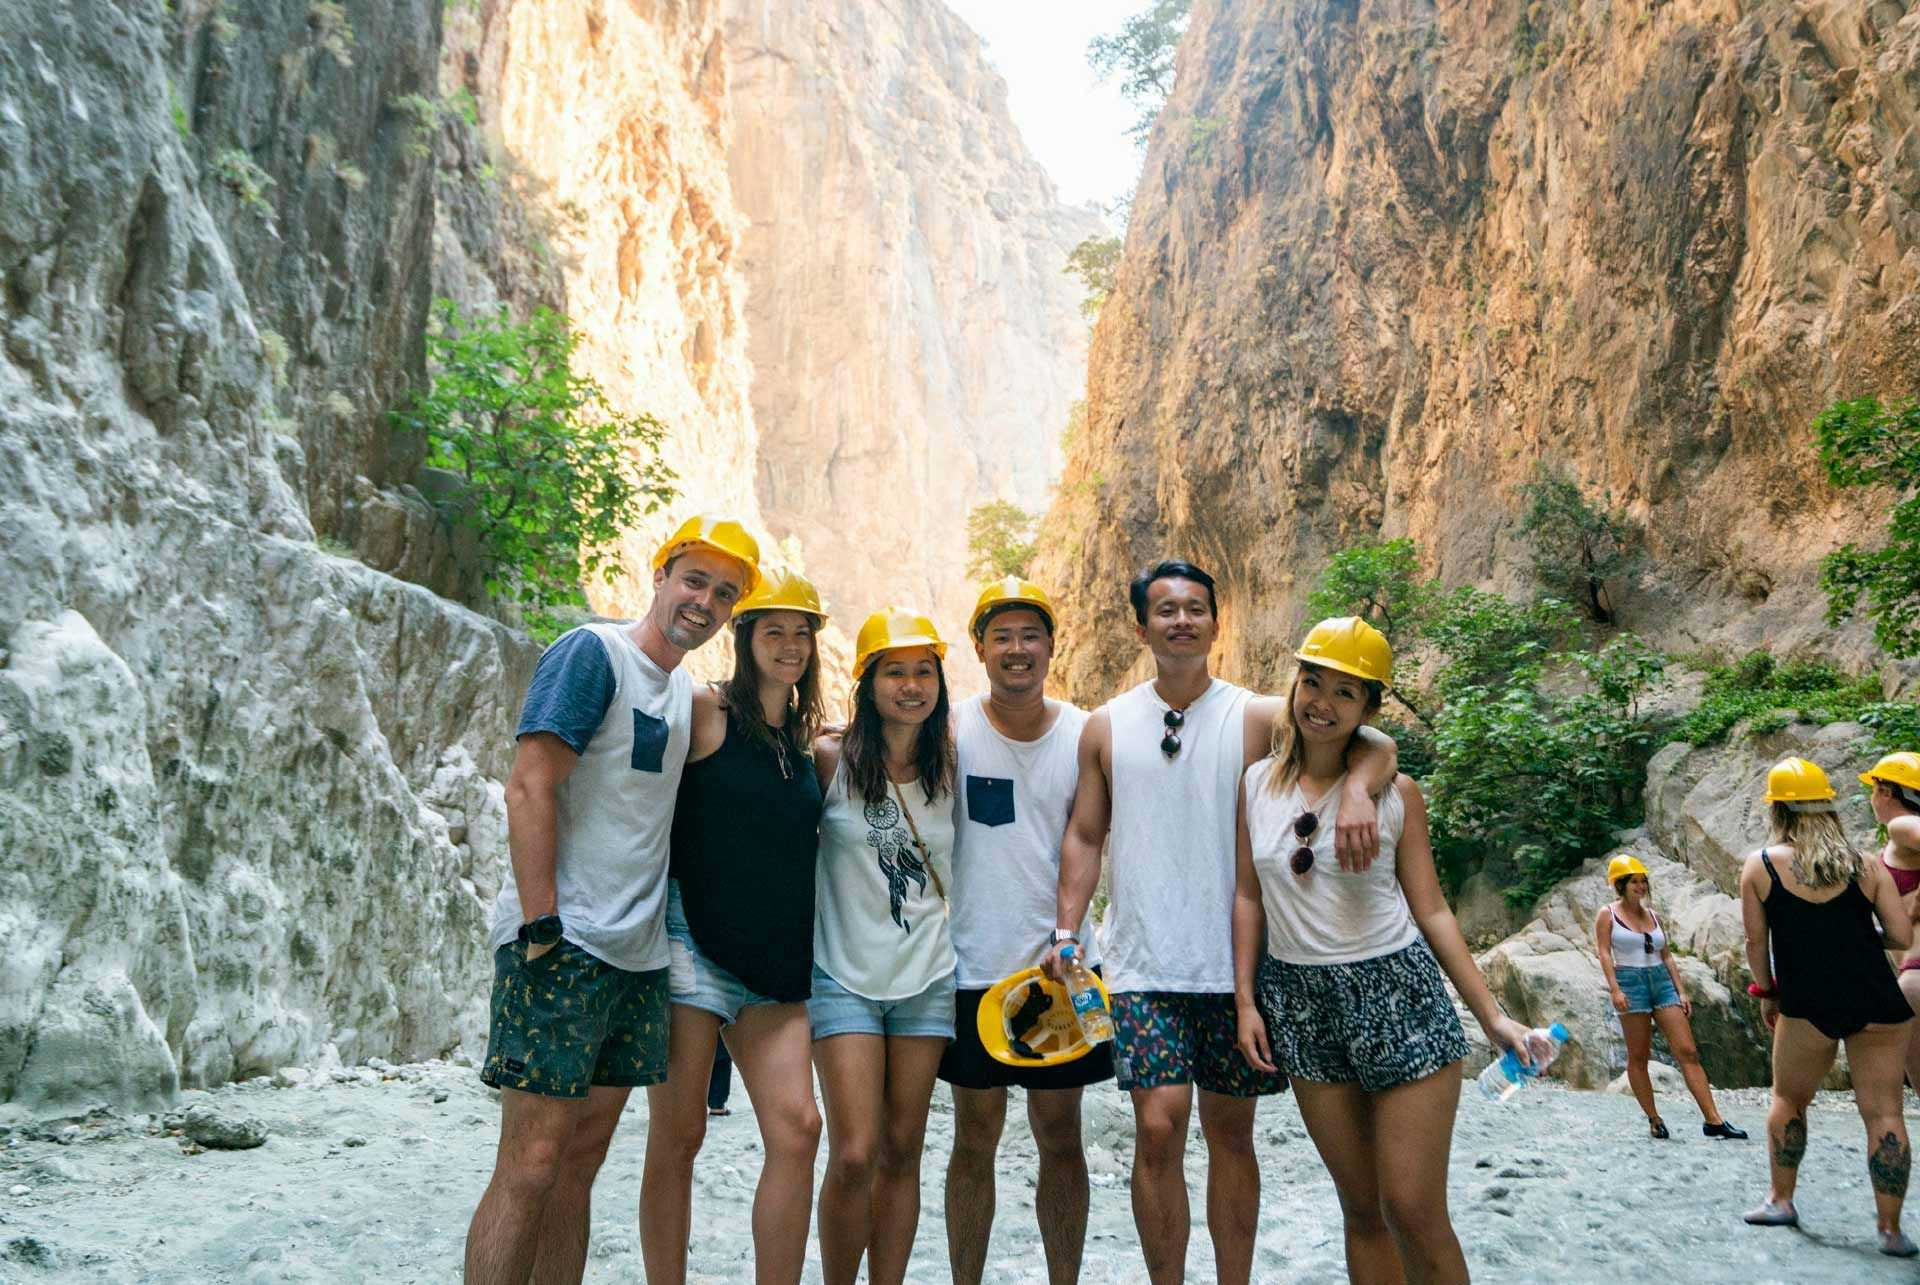 Group of friends in Saklikent Gorge